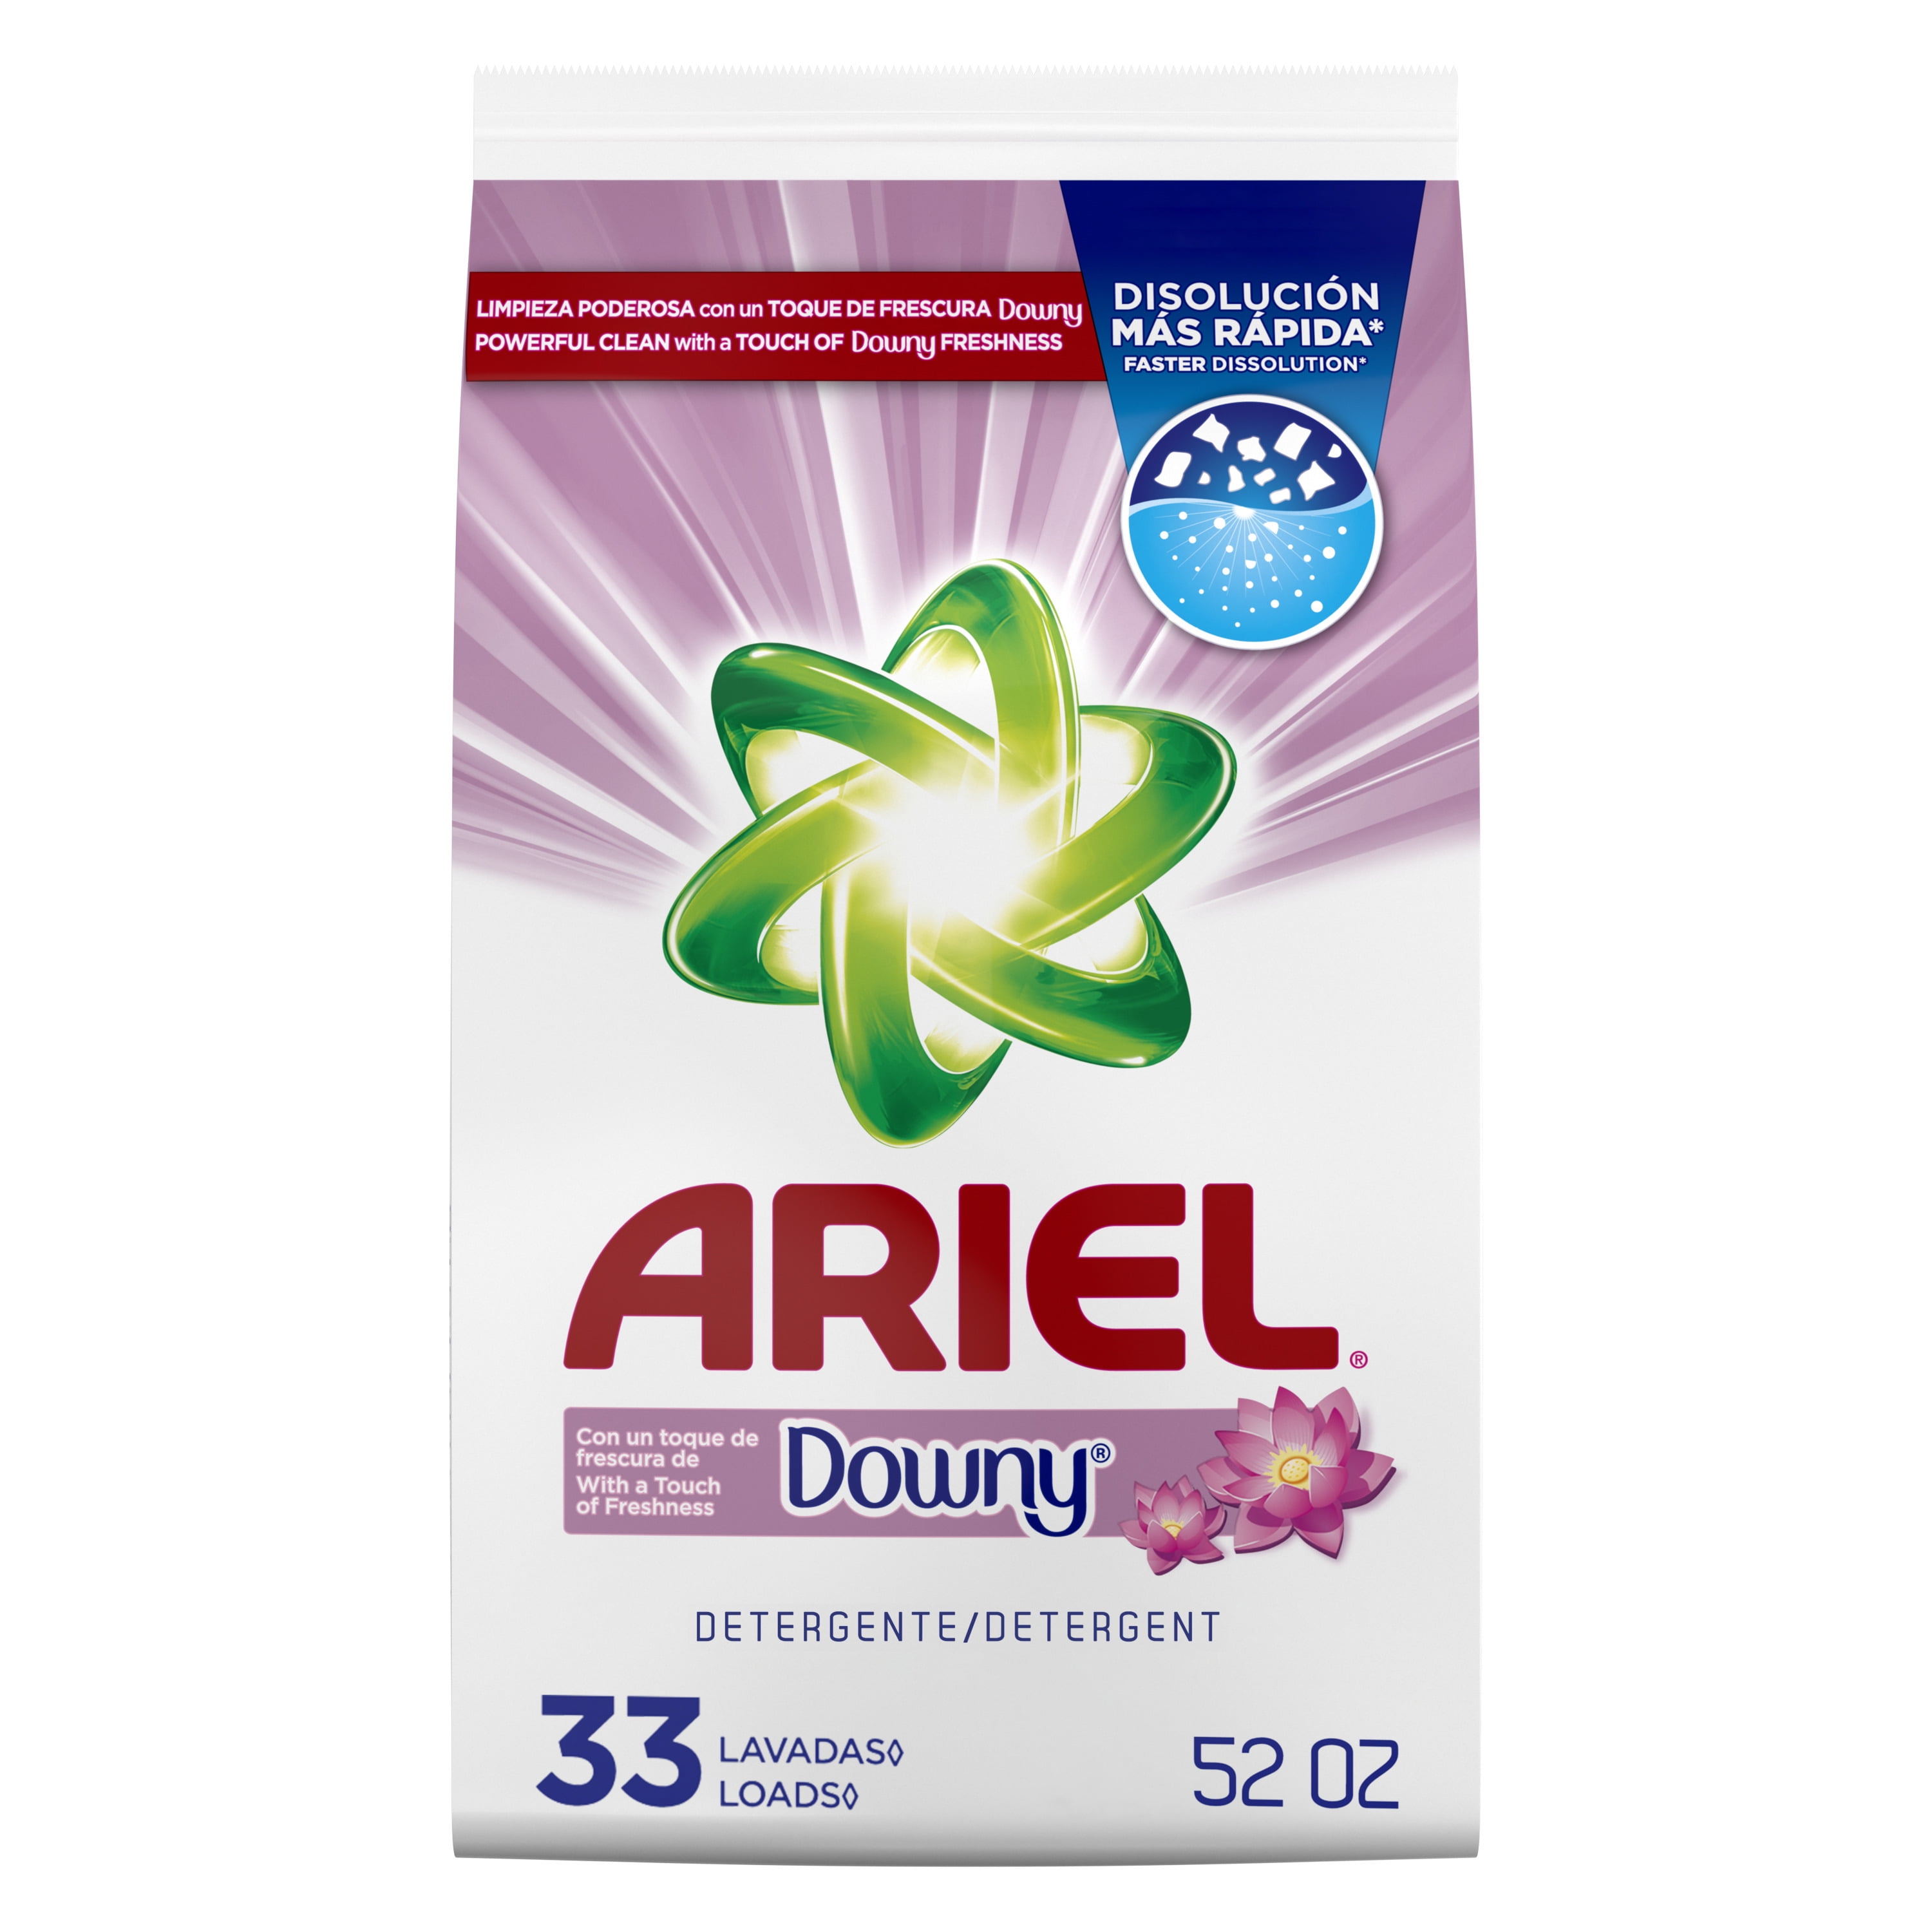 Ariel with a Touch of Downy Freshness, 33 Loads Powder Laundry Detergent, 52 oz